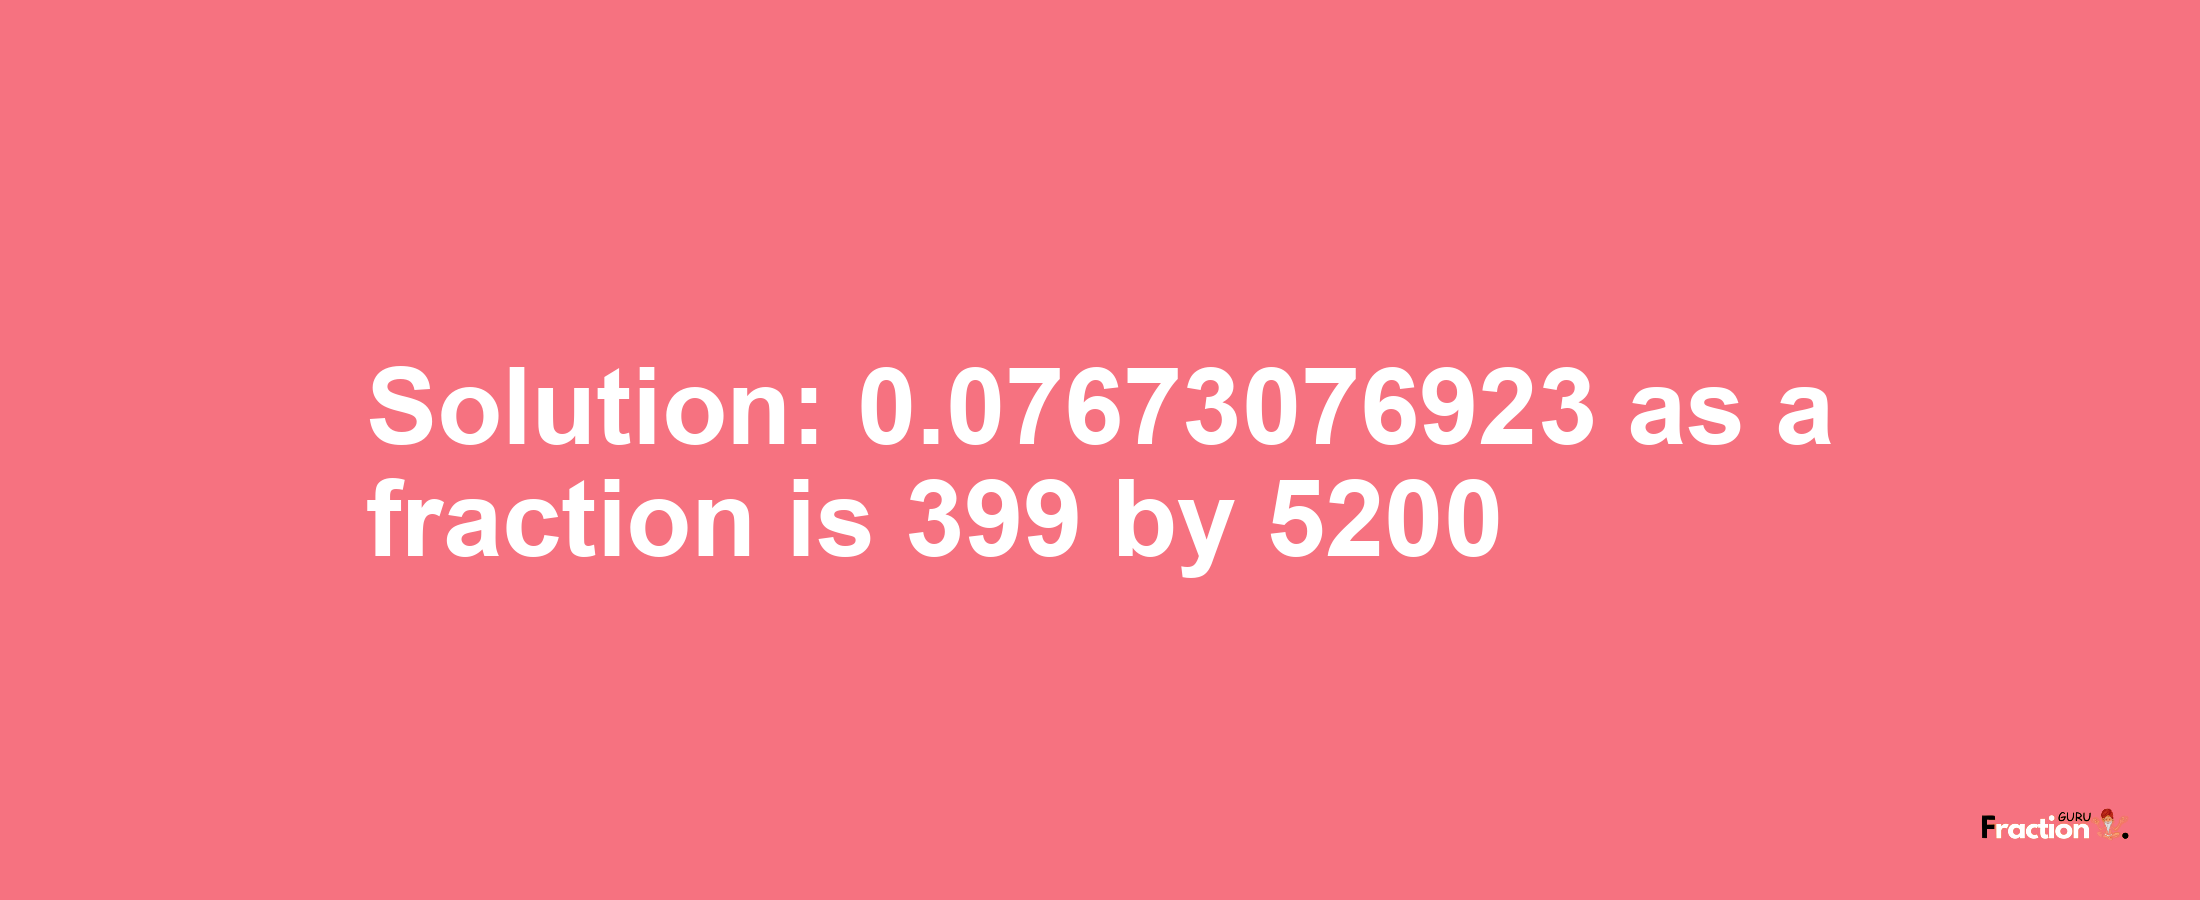 Solution:0.07673076923 as a fraction is 399/5200